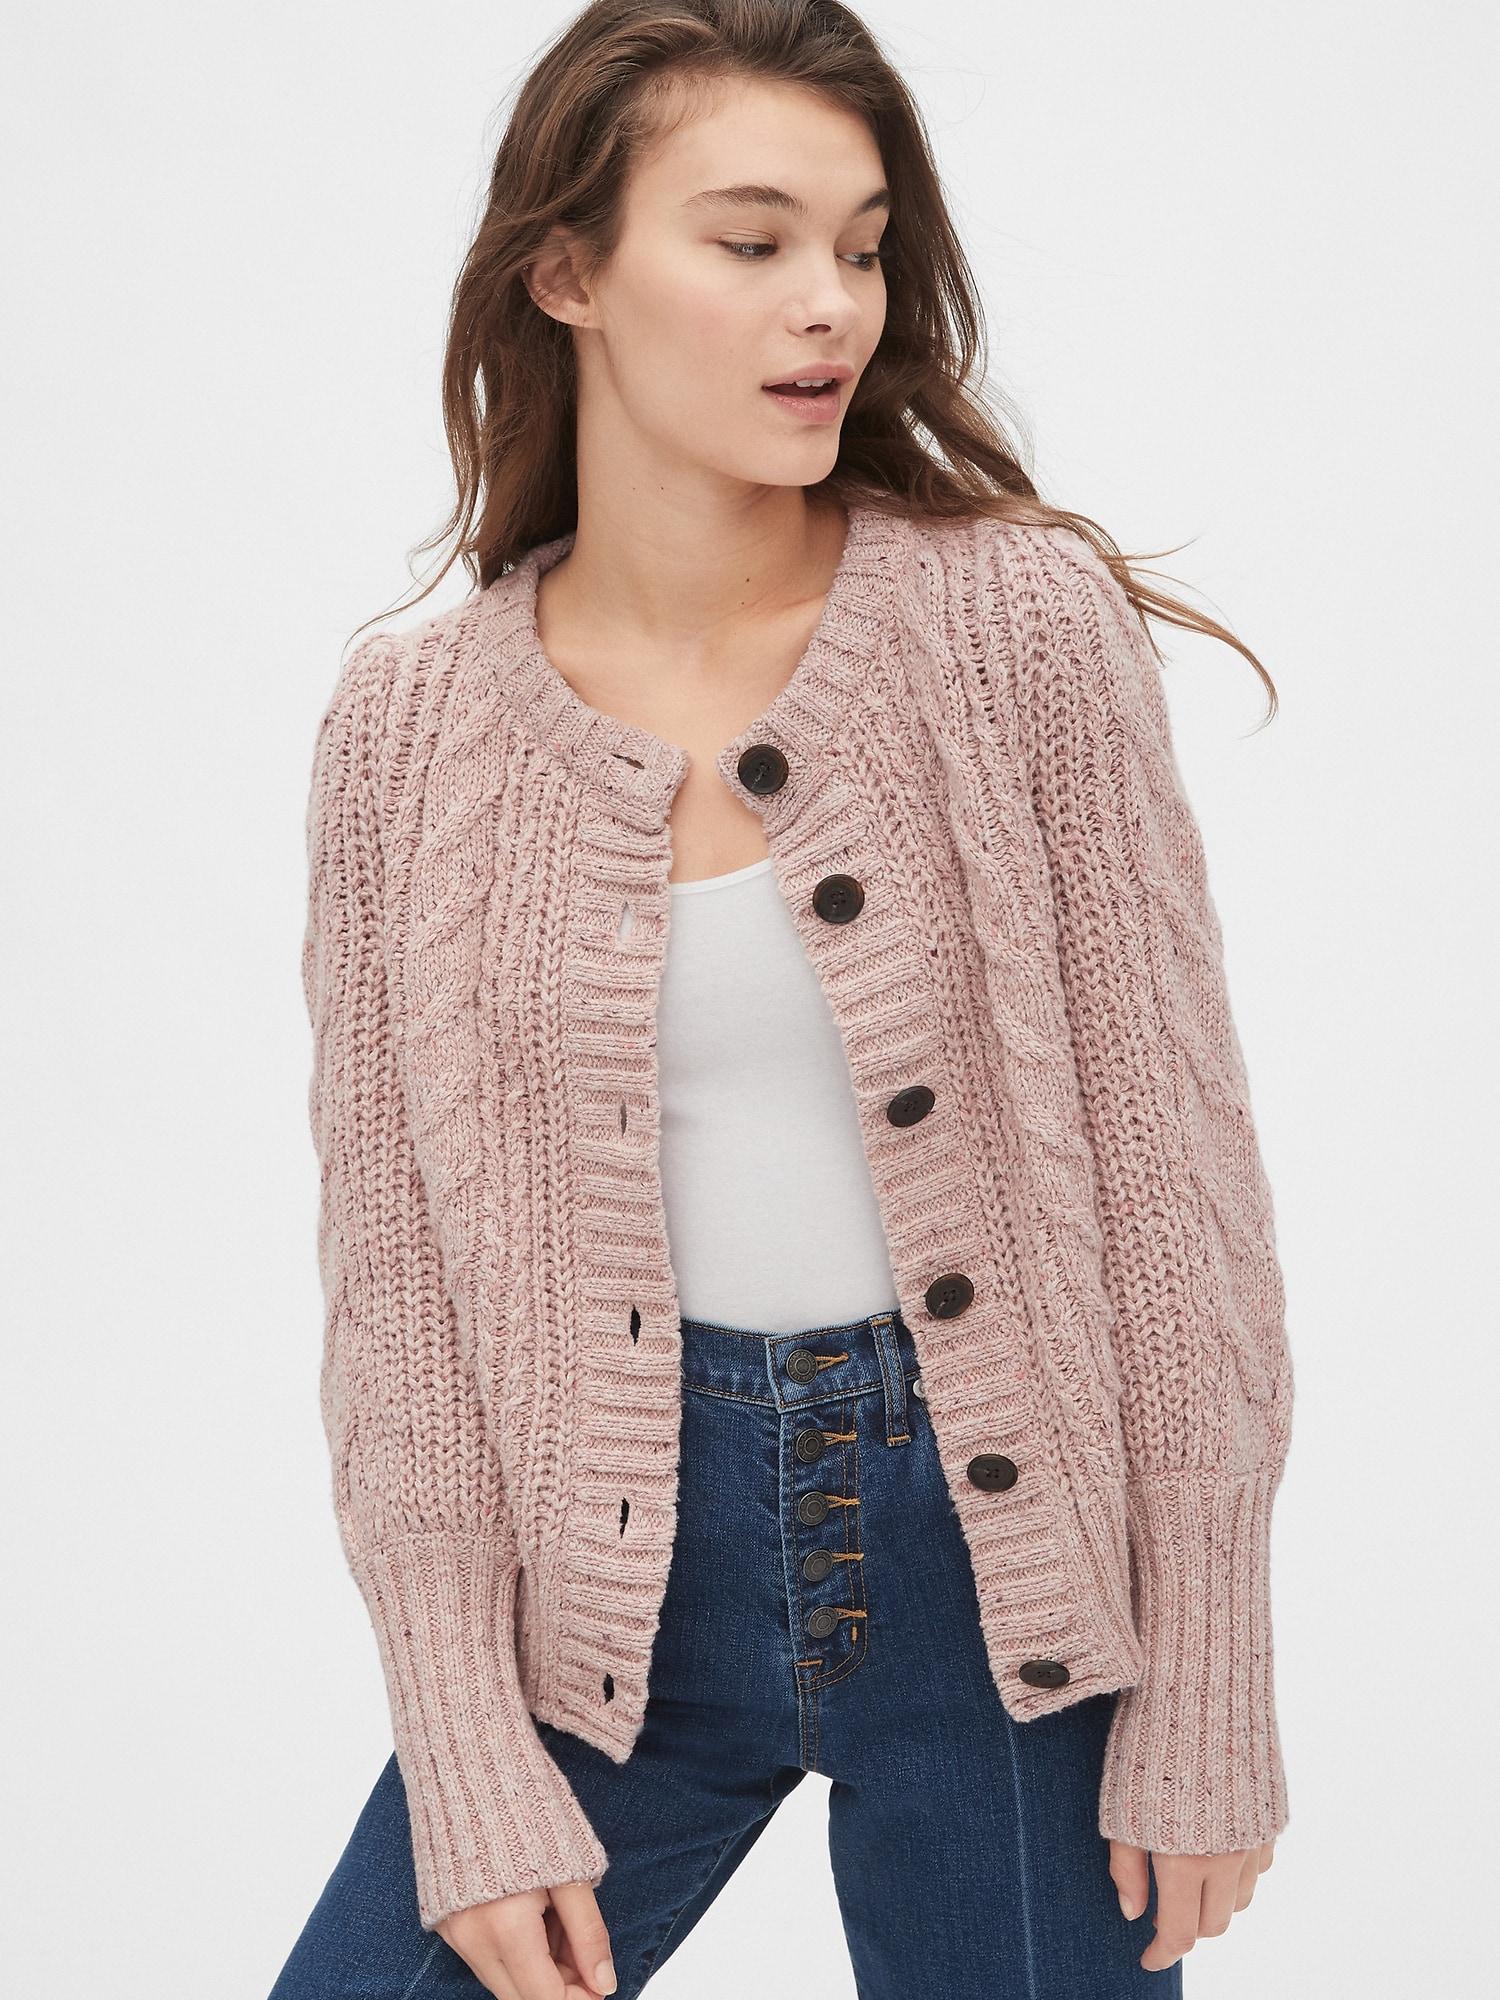 Gap Synthetic Chunky Cable-knit Cardigan Sweater in Soft Pink Heather  (Pink) - Lyst